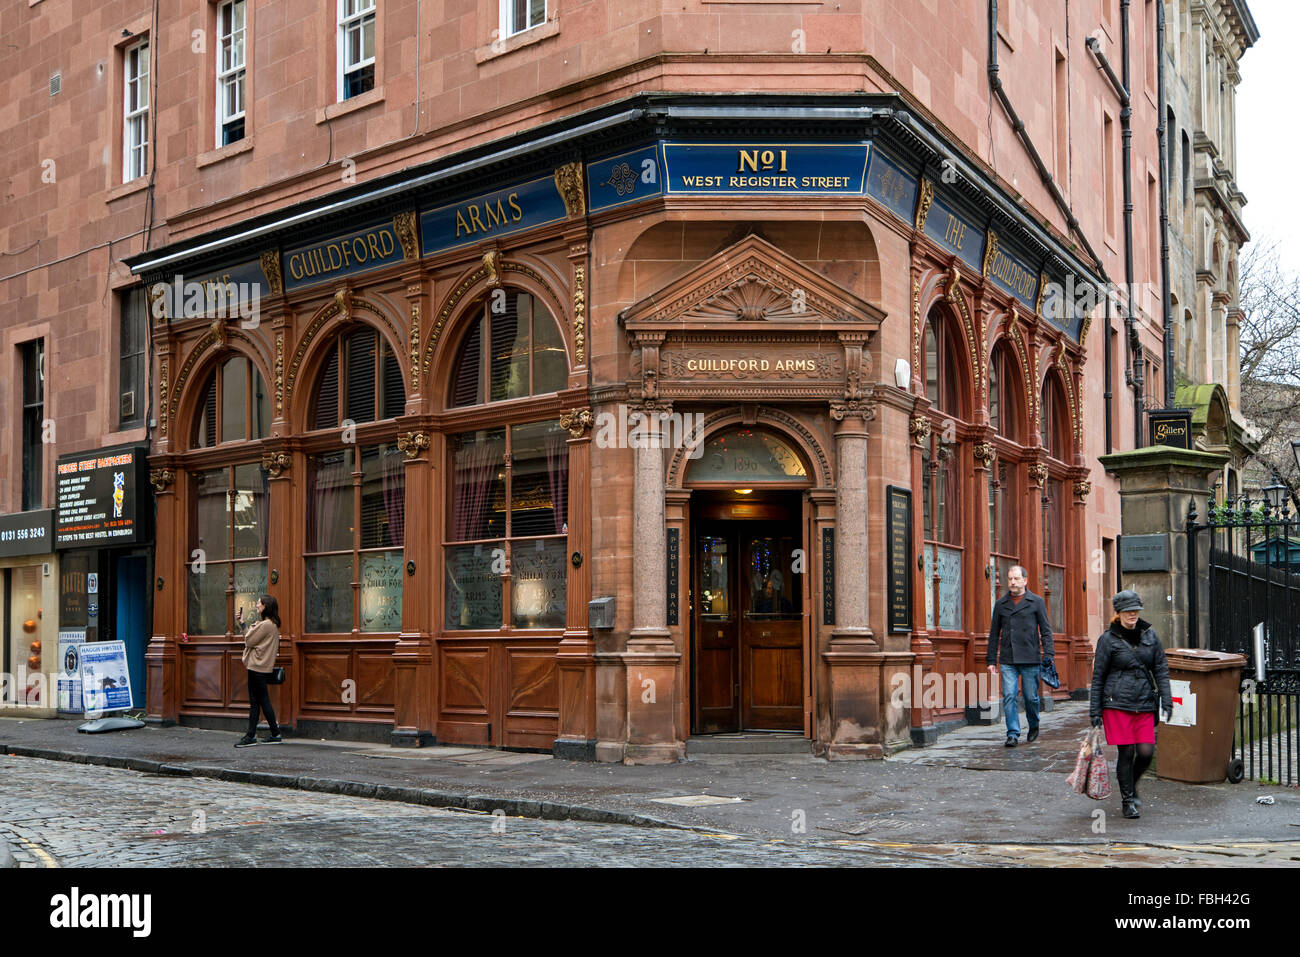 The Guildford Arms public house in West Register Street in Edinburgh, Scotland UK. Stock Photo